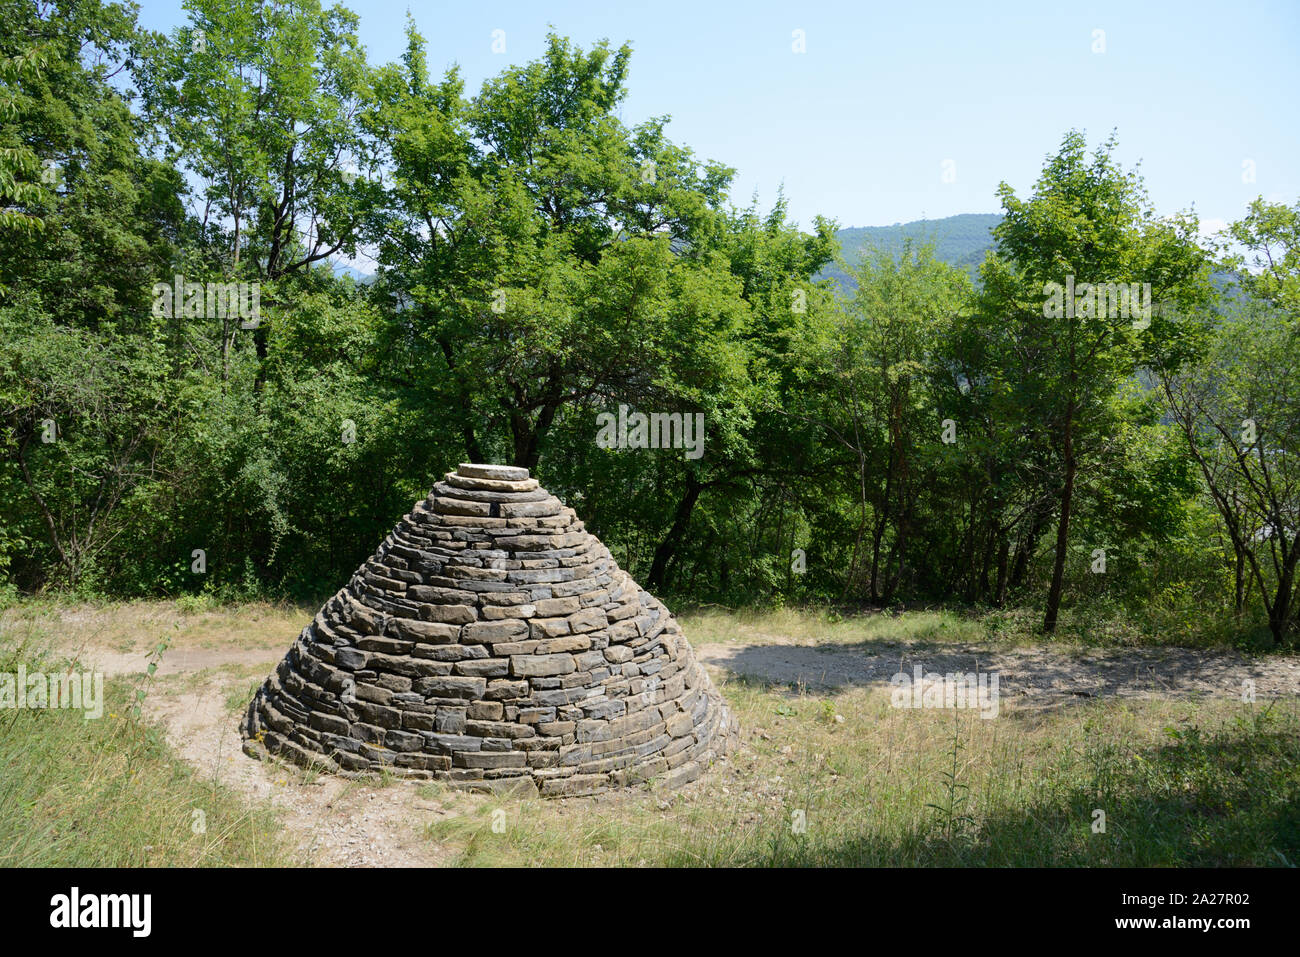 Cairn by Andy Goldsworthy in the Park or Grounds of the Musée Promenade or Natural History Museum Digne-les-Bains Alpes-de-Haute-Provence France Stock Photo